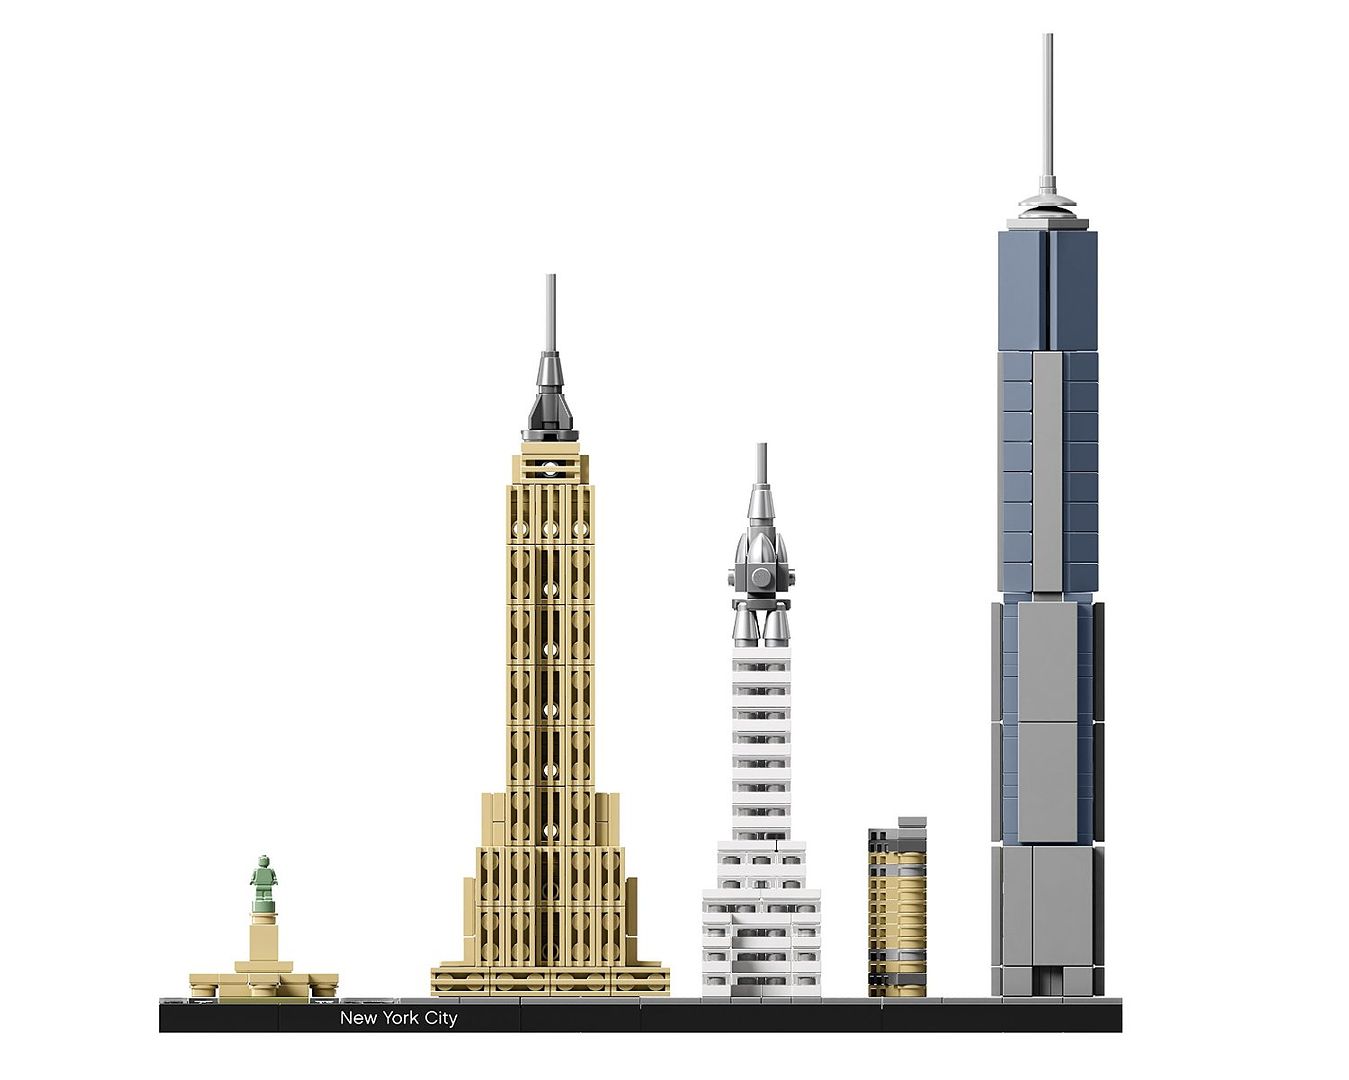 LEGO Architecture Kits let more advanced builders construct models of famous landmarks around the world